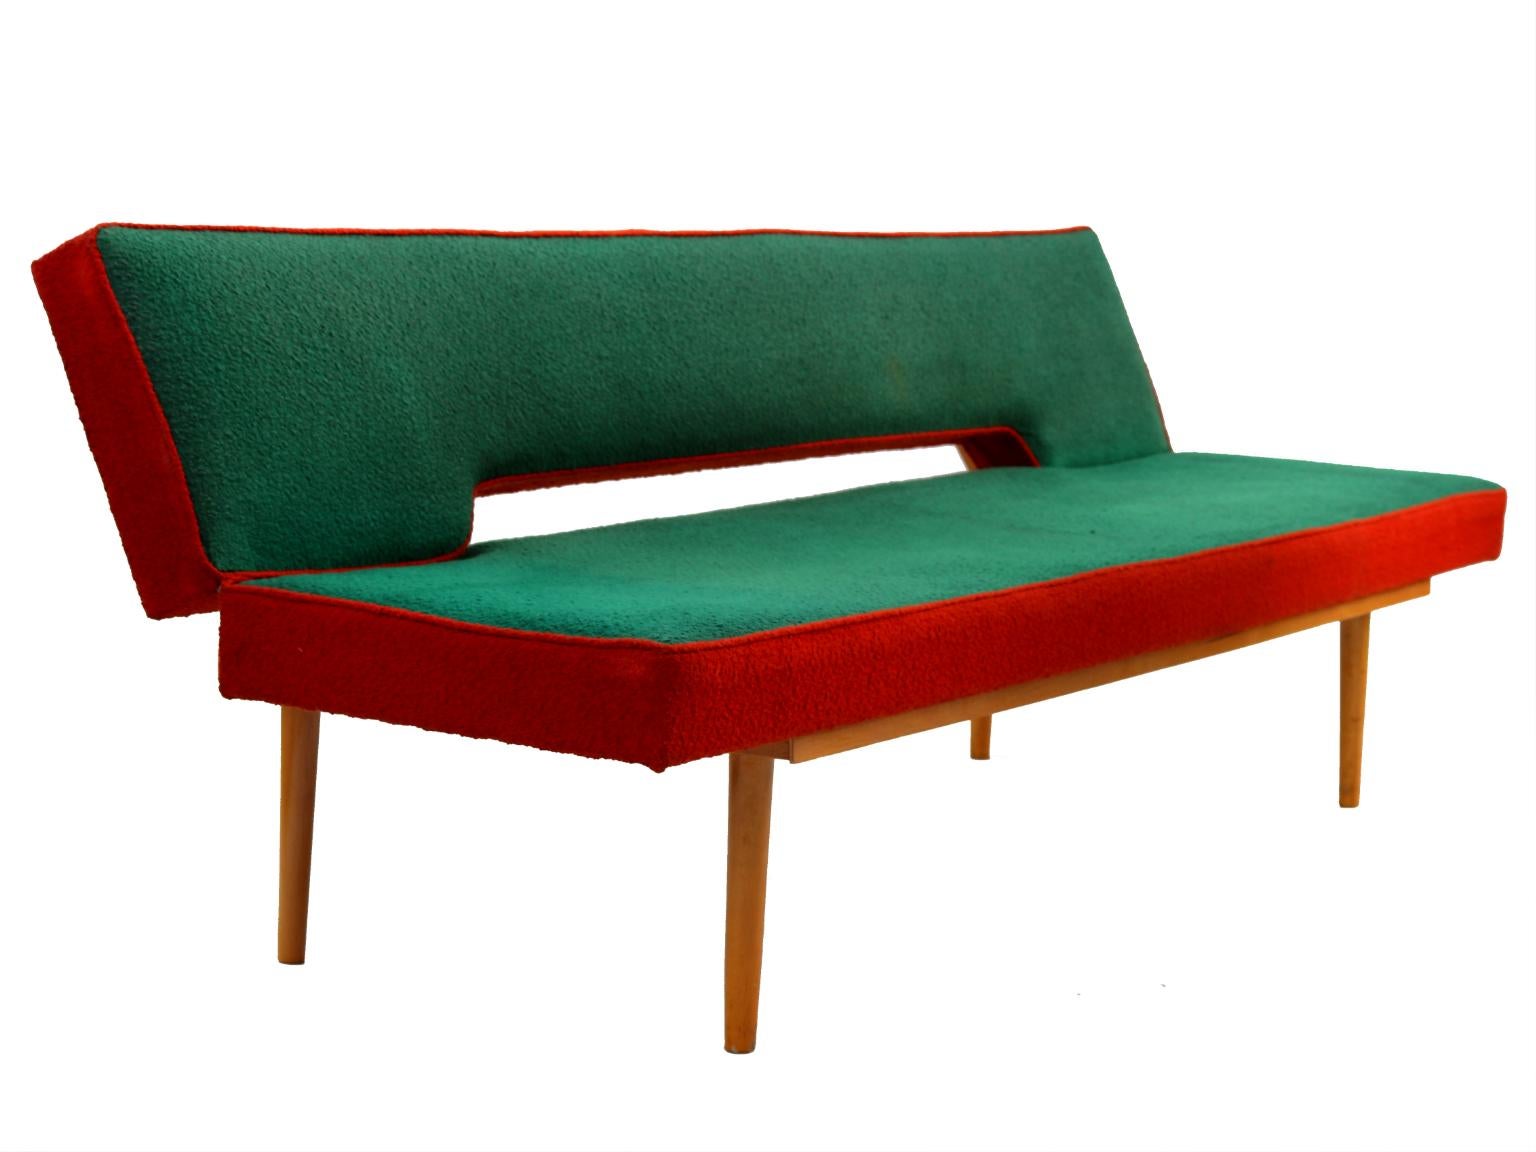 This sofa was designed by Miroslav Navratil in the 1960s fo Interier Praha Czechoslovakia. It features a beech frame with the original red and green fabric. It is easily folded out into a 90 cm wide bed,